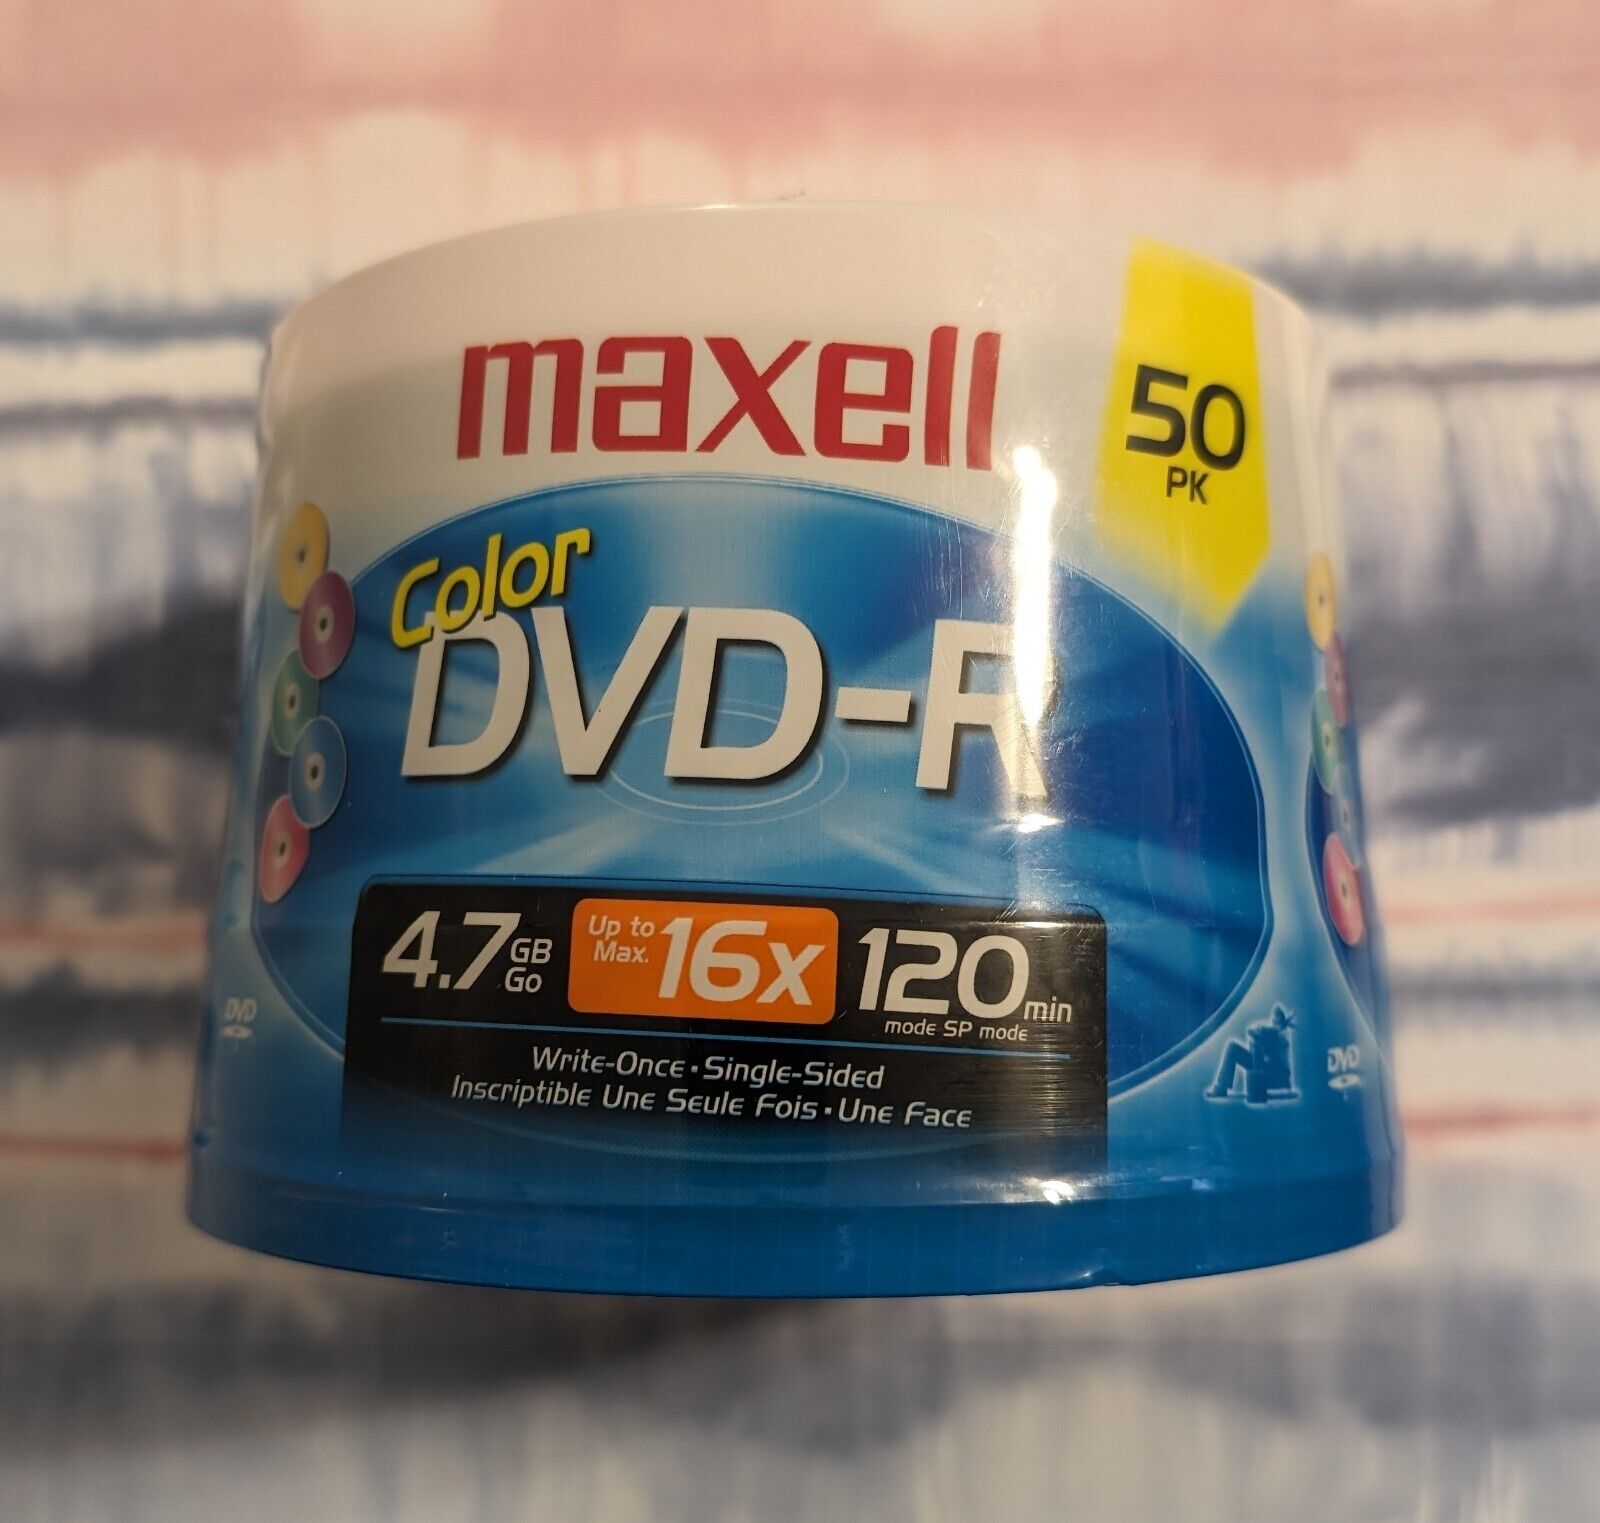 Maxell Color DVD-R 50 Pack 16x 4.7gb 120 Min Factory Sealed Spindle - Fun Colors